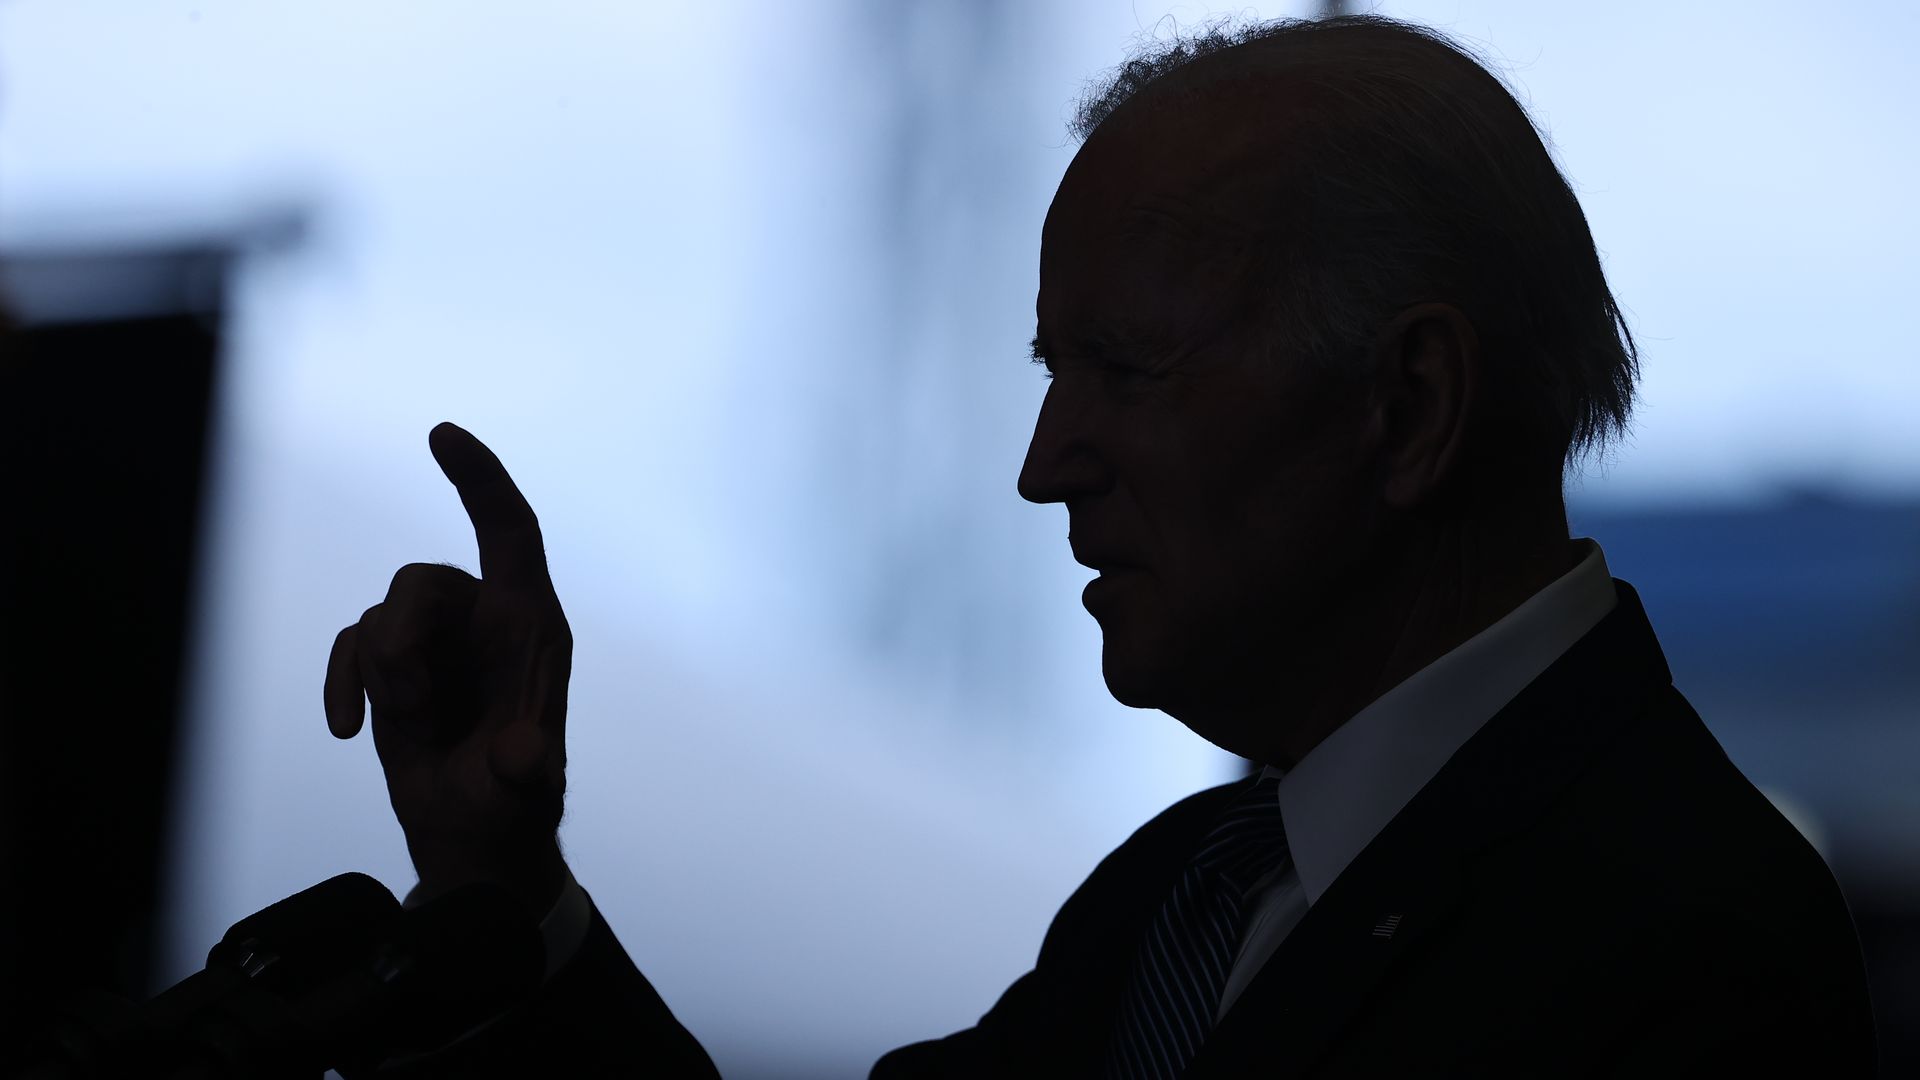 President Biden is seen speaking in silhouette during a visit Tuesday to Portsmouth, N.H.